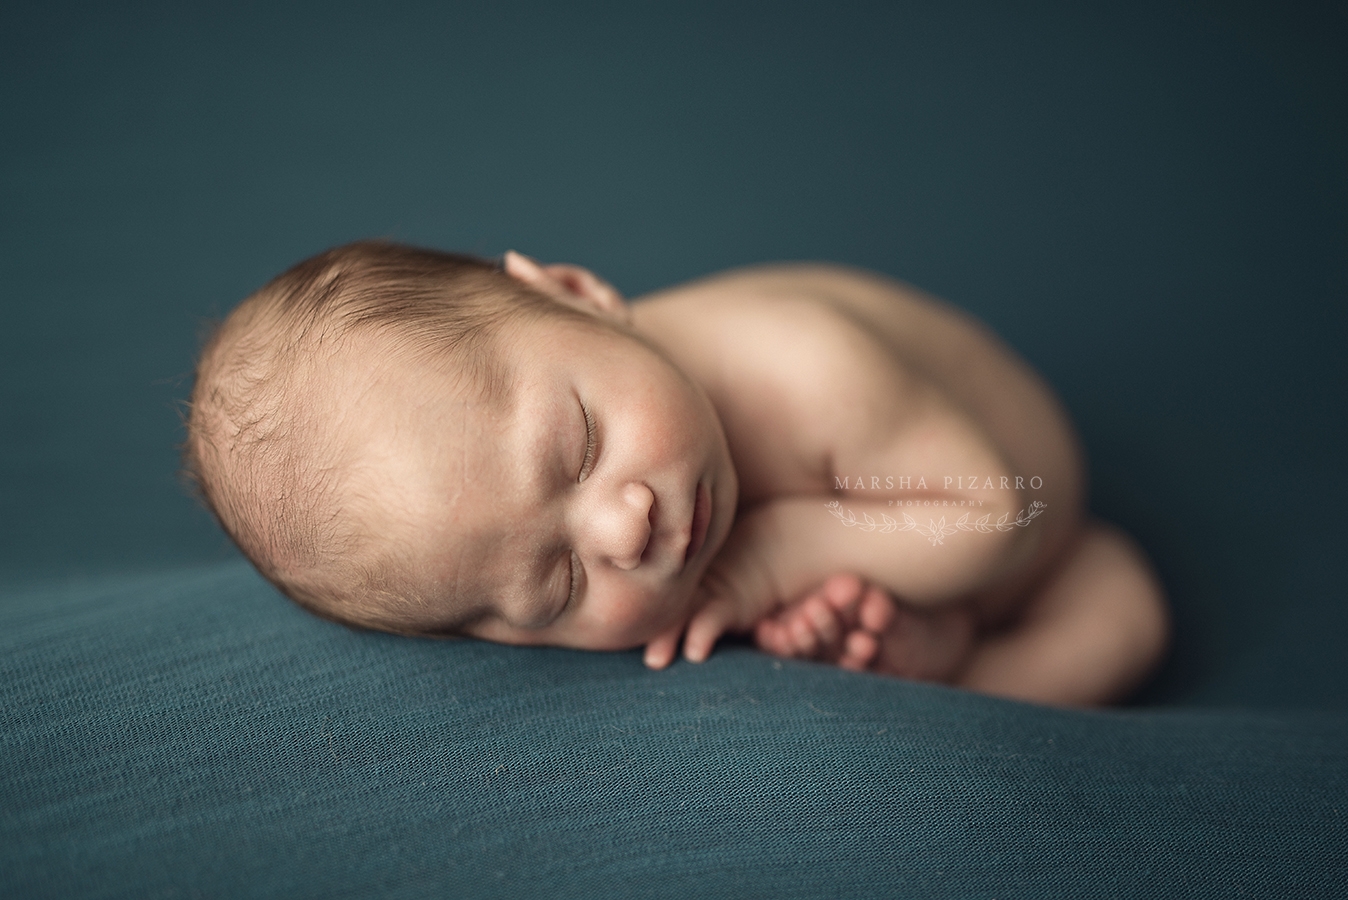 How to Pose a Baby From One of Dallas' Best Newborn Photographers